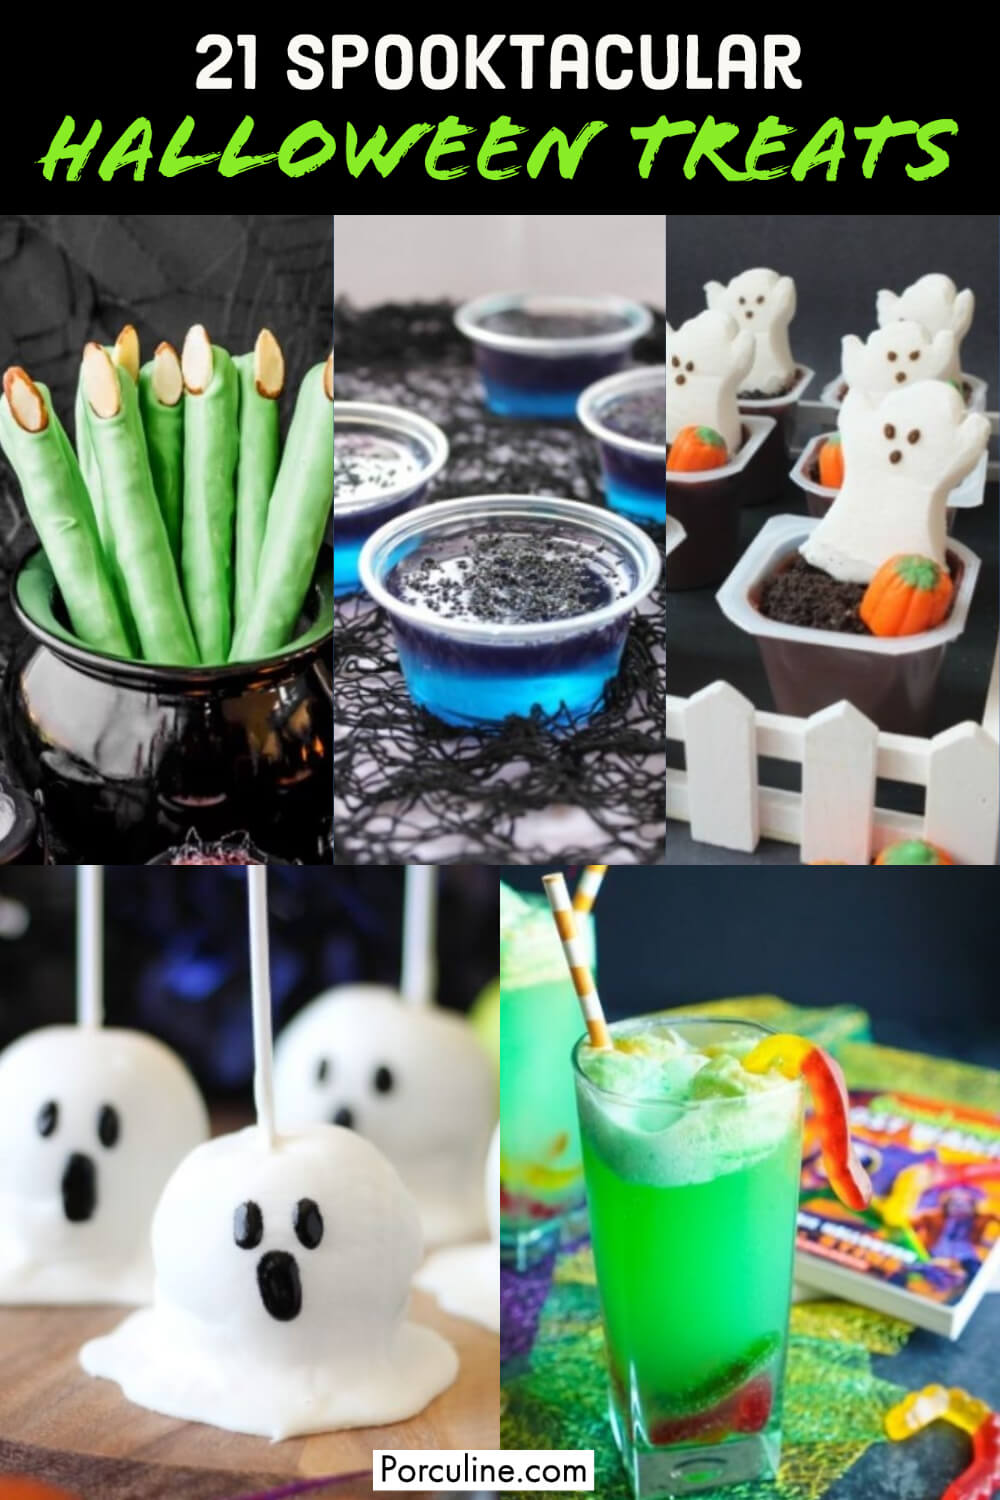 21 Easy Halloween Snack That'll Make Your Day Spooktacular - Porculine.com